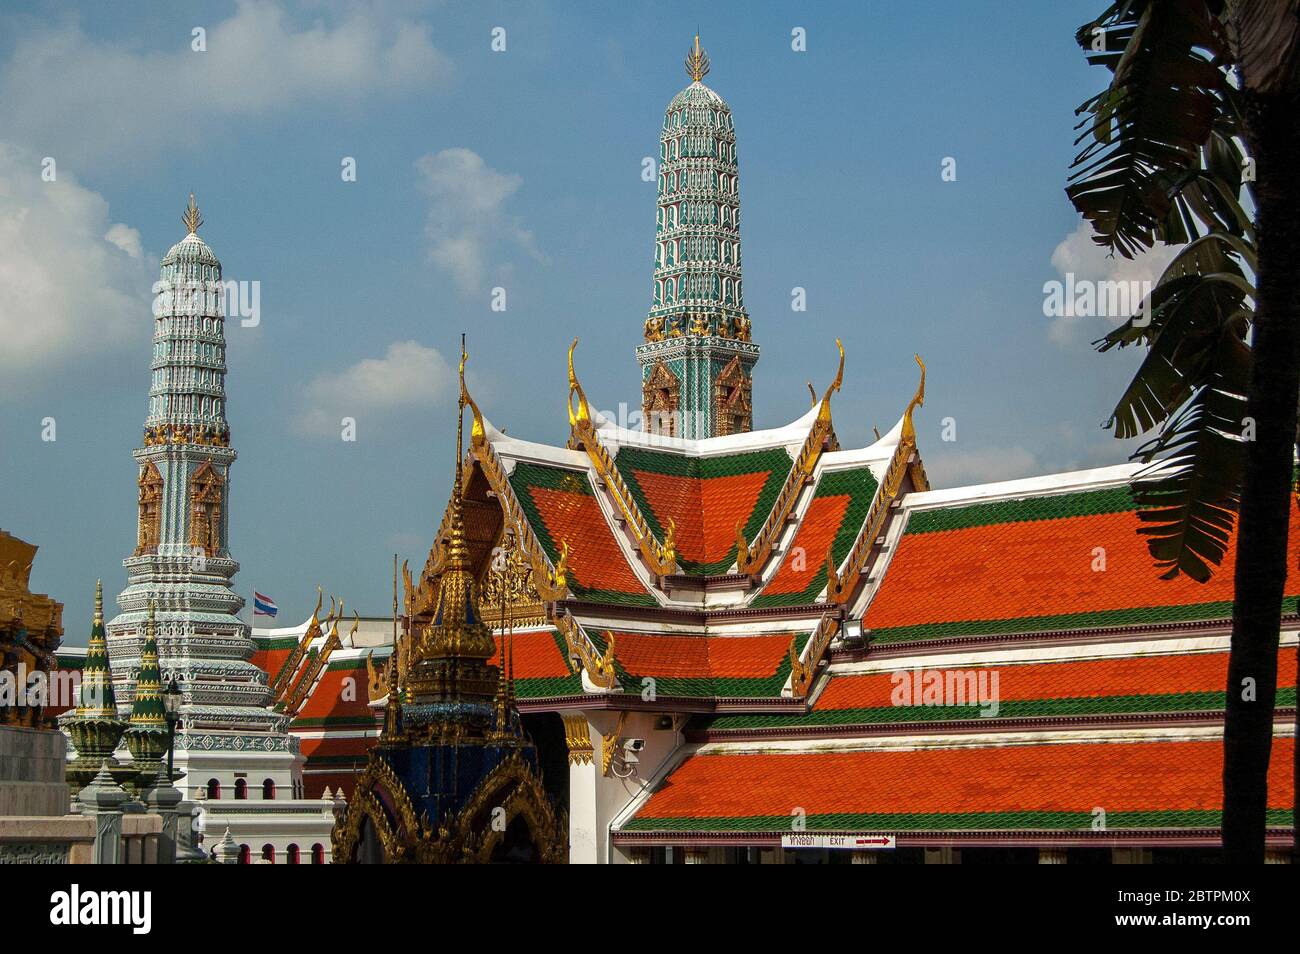 Phra Maha Montian Group is the grand residence that consists of 7 connecting buildings in the Grand Palace complex in Bangkok, Thailand. Stock Photo